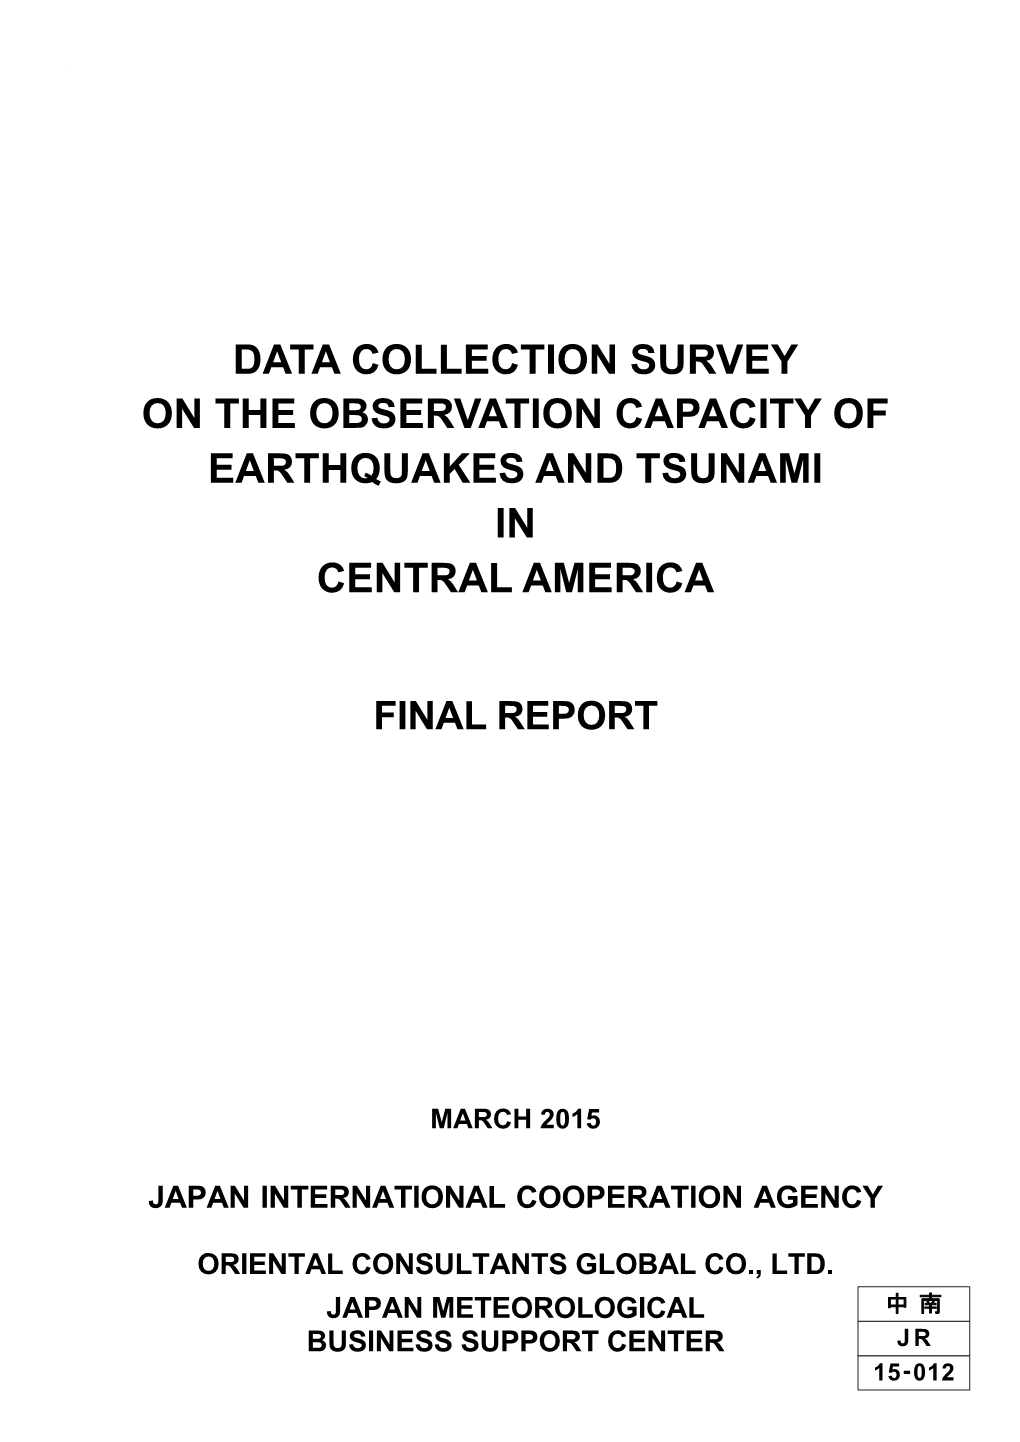 Data Collection Survey on the Observation Capacity of Earthquakes and Tsunami in Central America